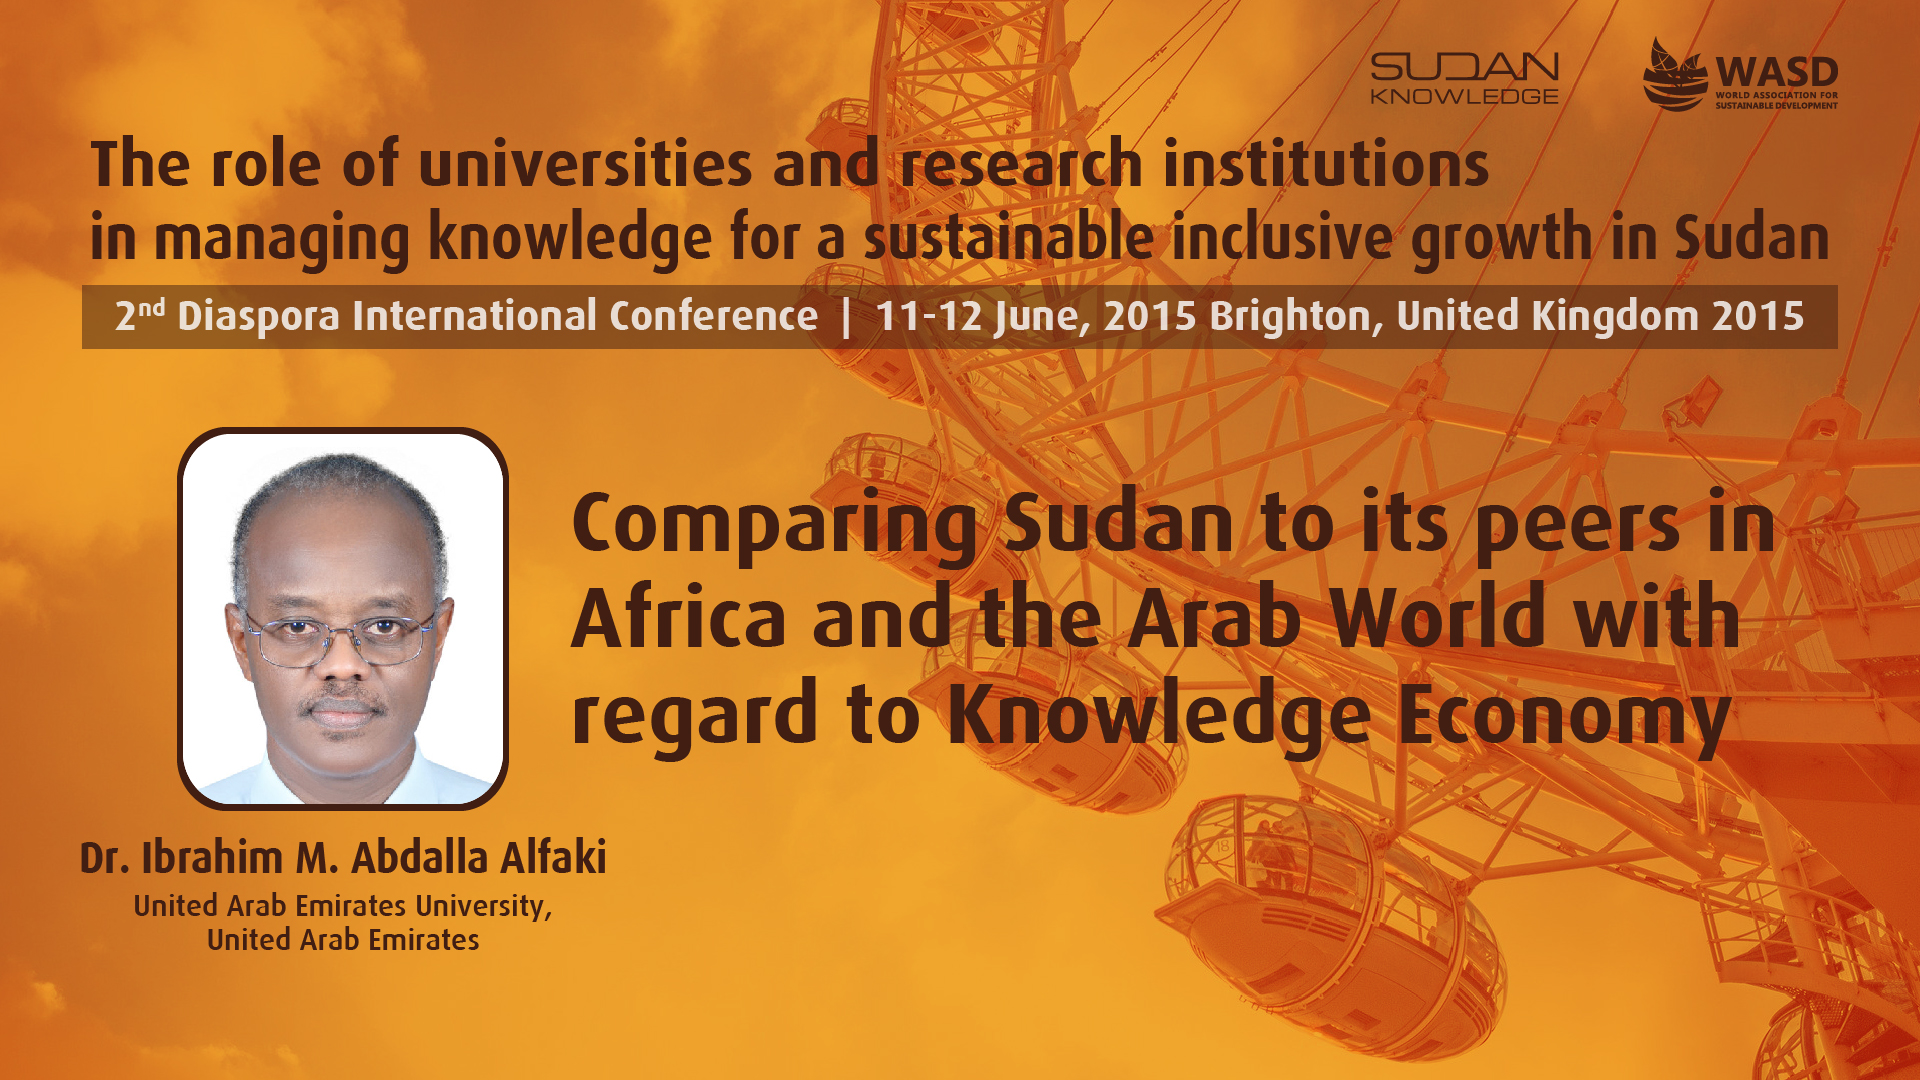 Comparing Sudan to its peers in Africa and the Arab World with regard to Knowledge Economy